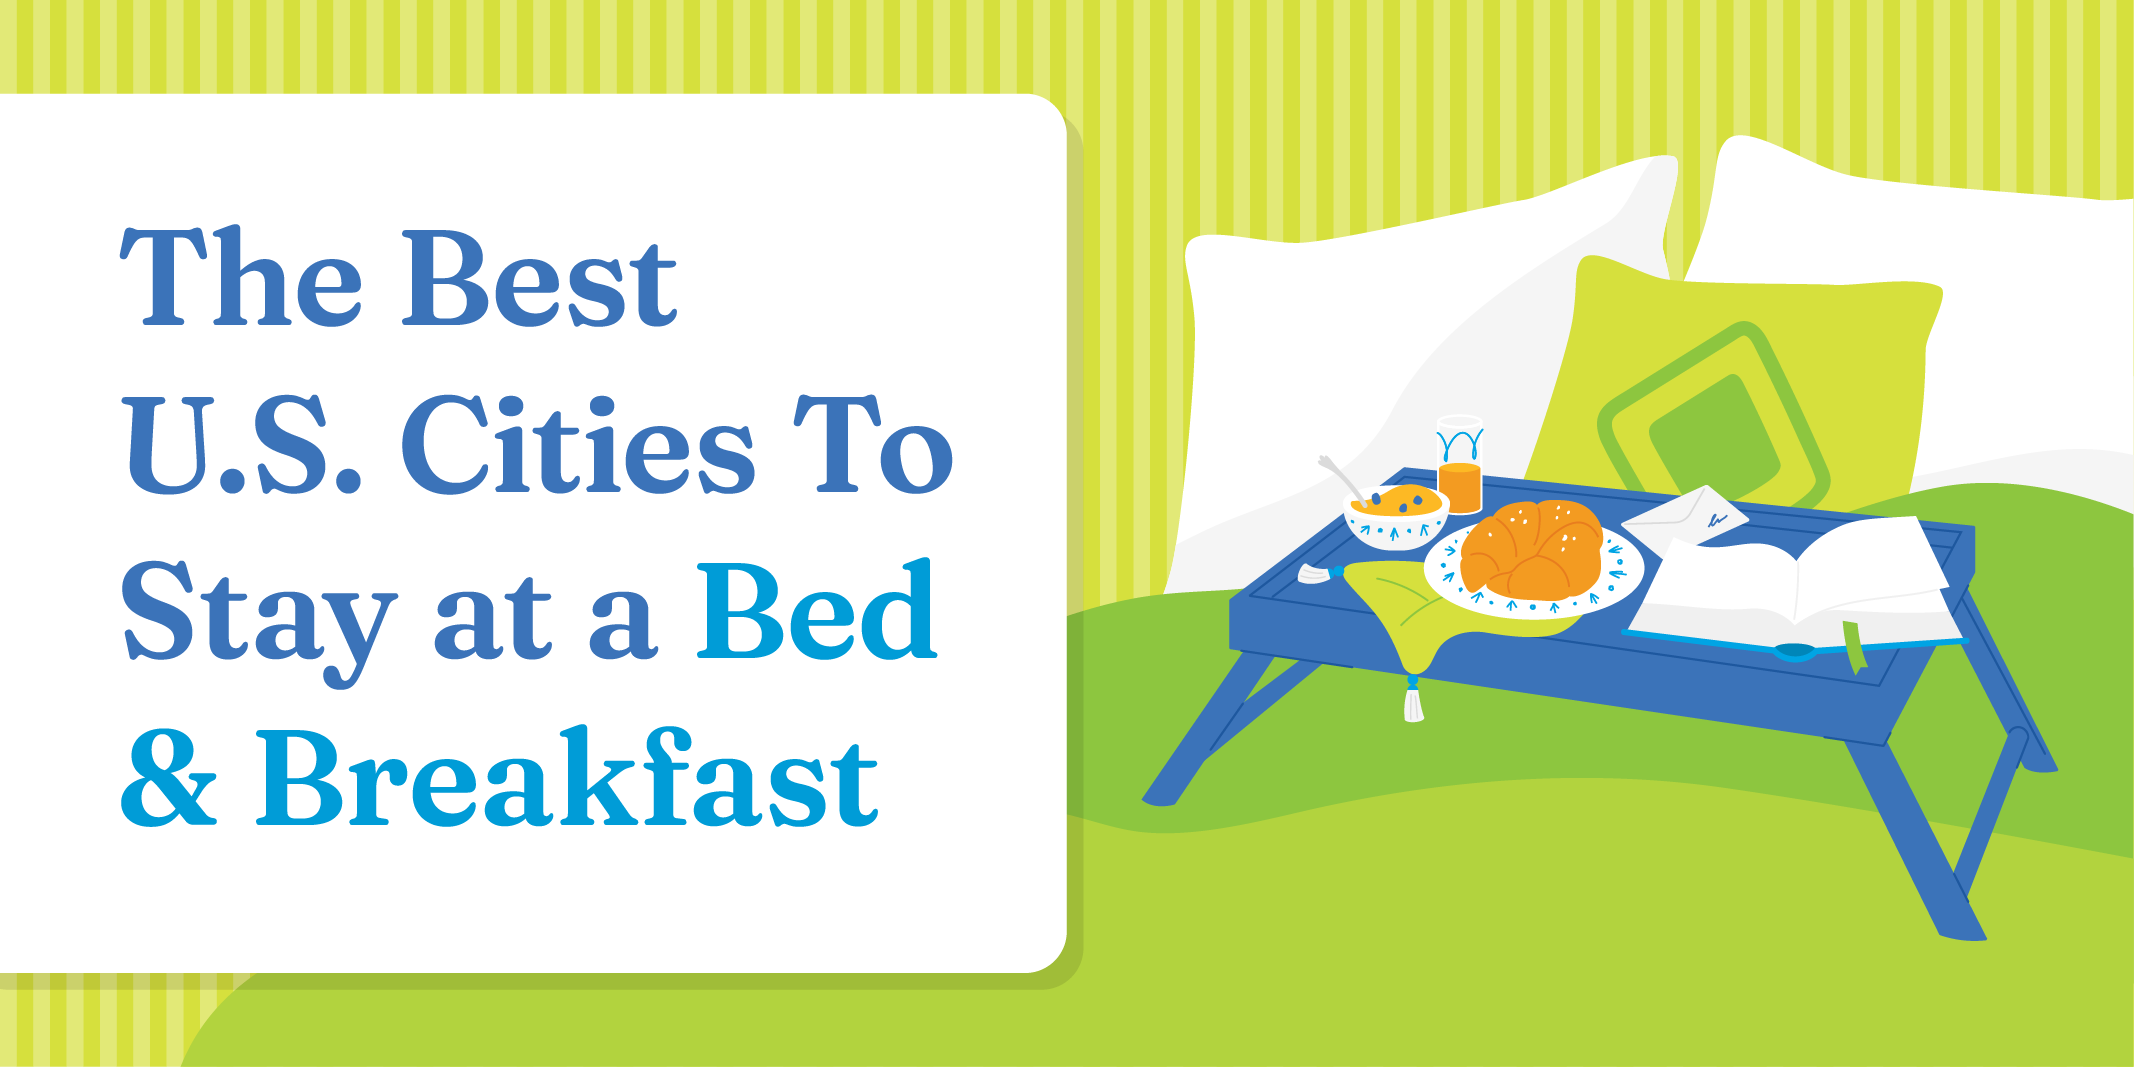 A header image for a blog about the best cities to stay at a bed and breakfast